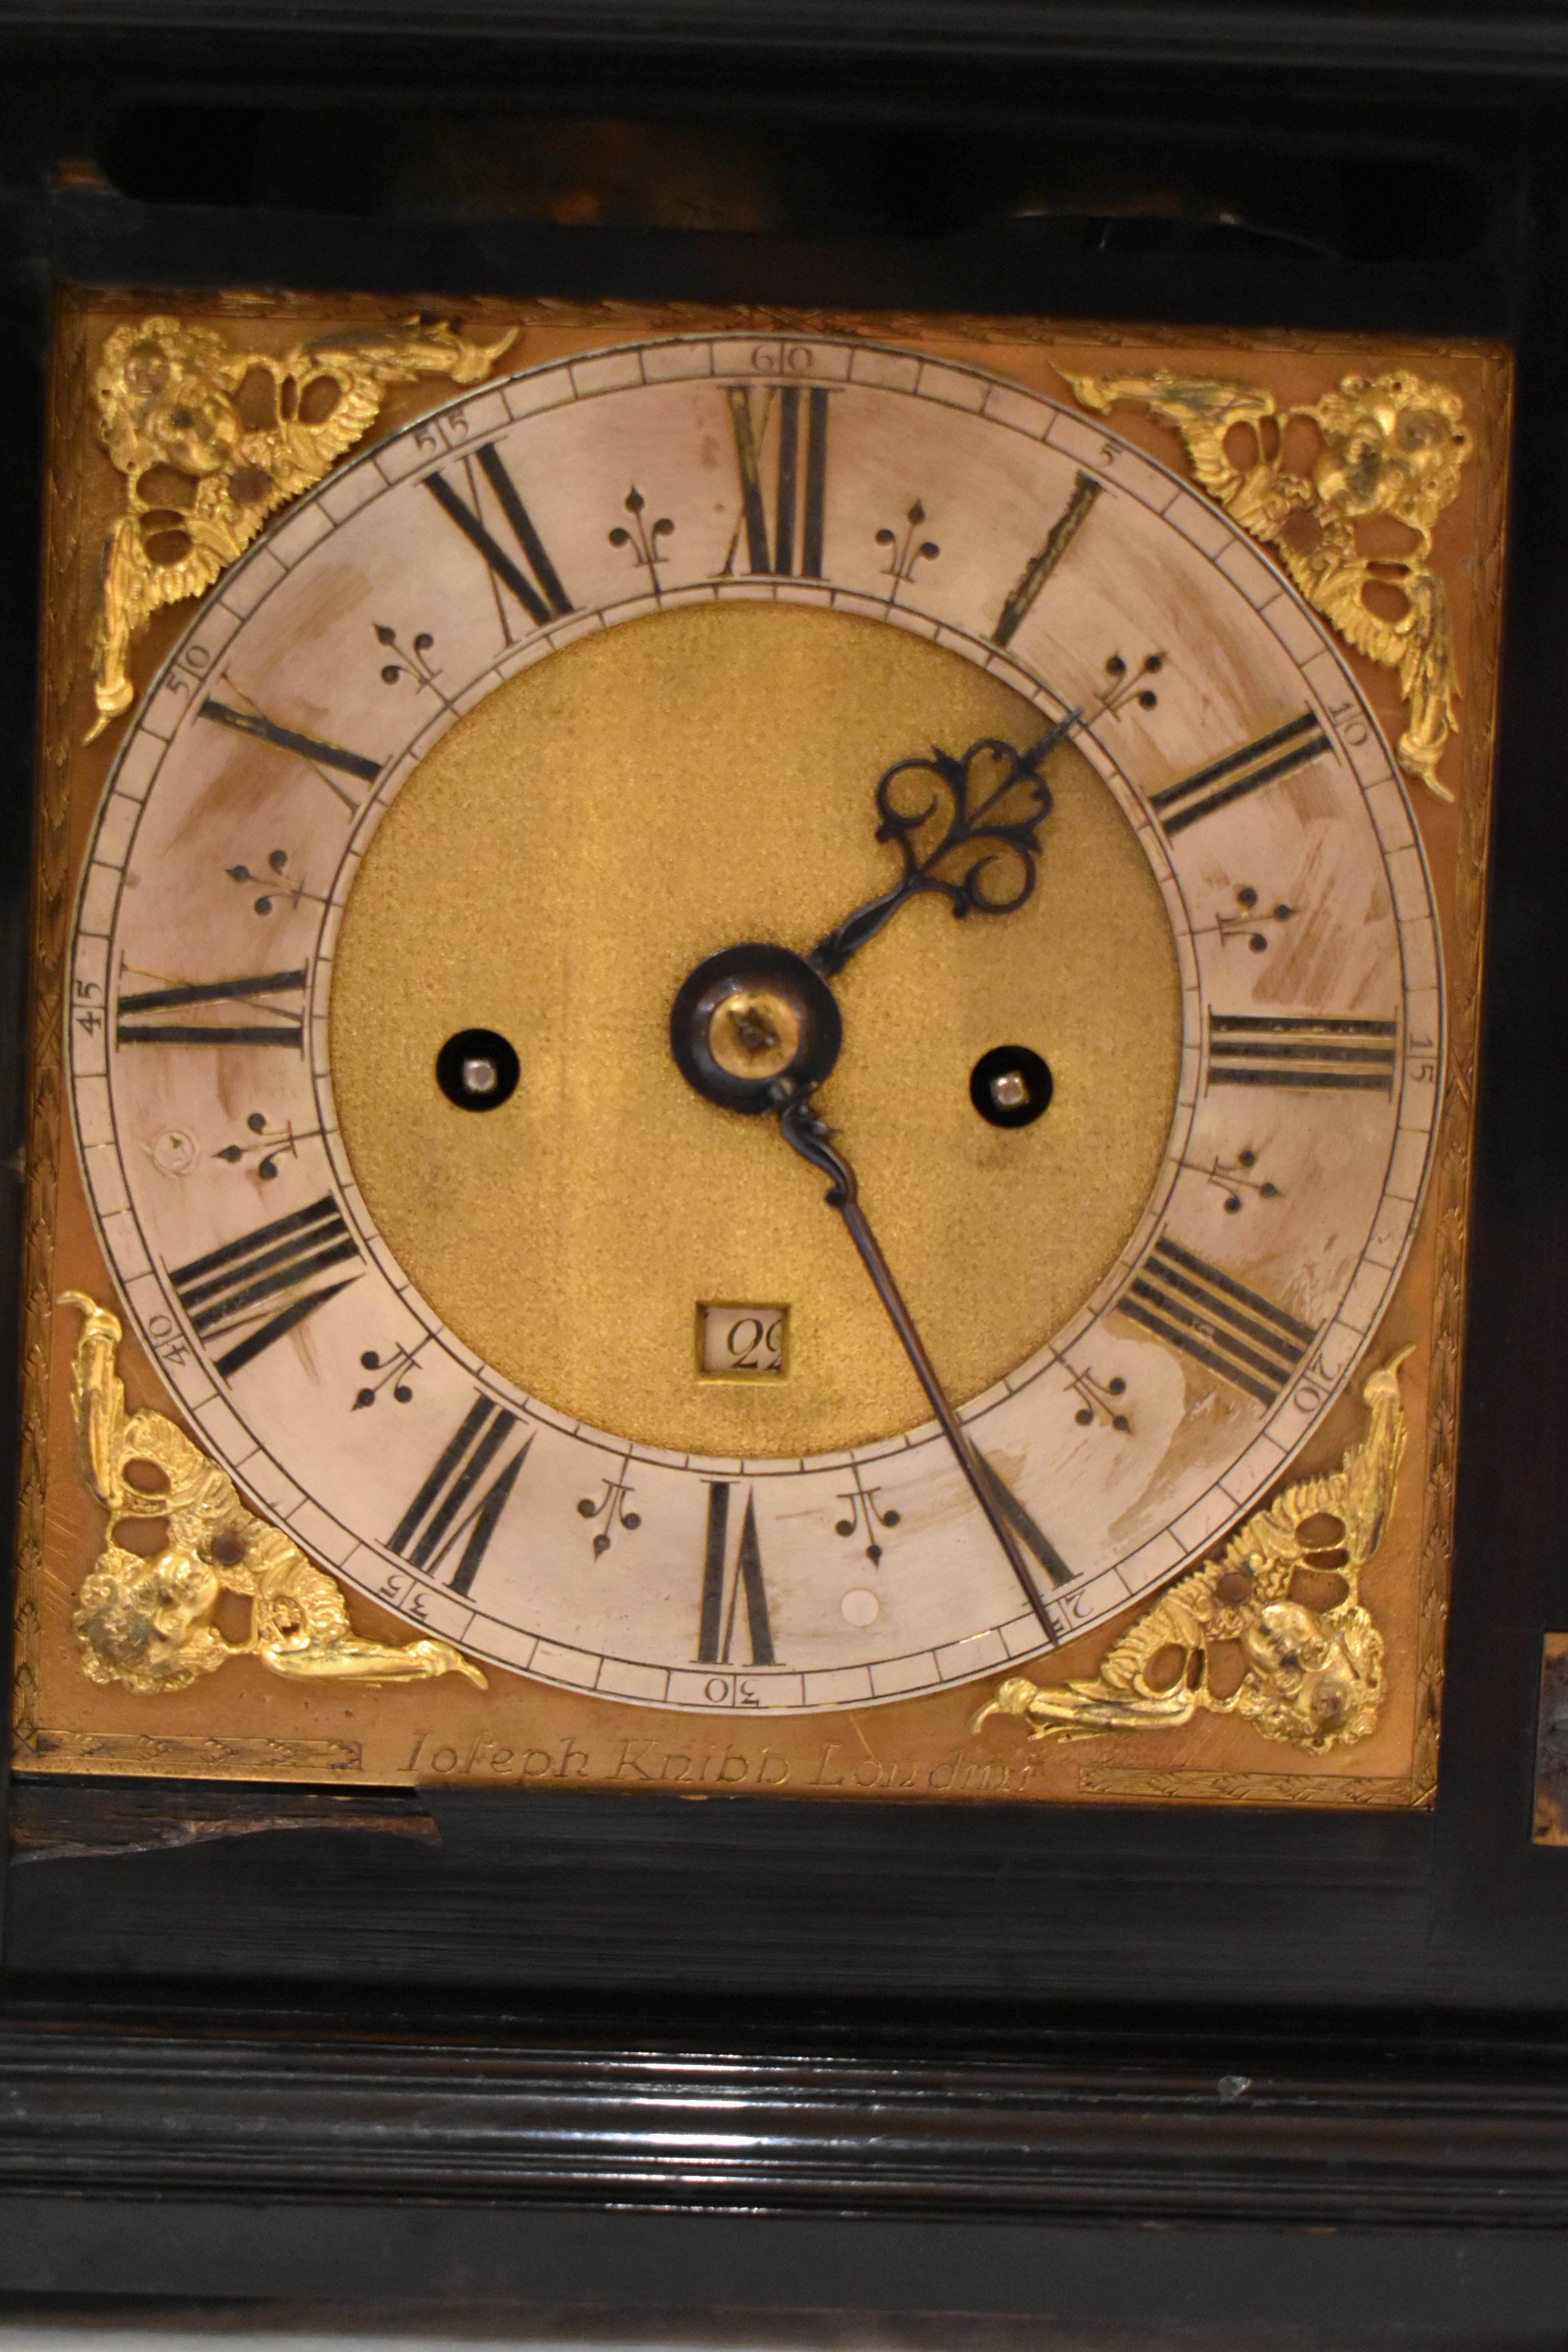 An 8-day ebony table clock with dial plate inscribed JOSEPH KNIBB LONDON and back plate inscribed JOSEPH KNIBB LONDON FECIT.

The ebony veneered case is surmounted by a foliate tied handle with turned base plates above the cushion molded top with